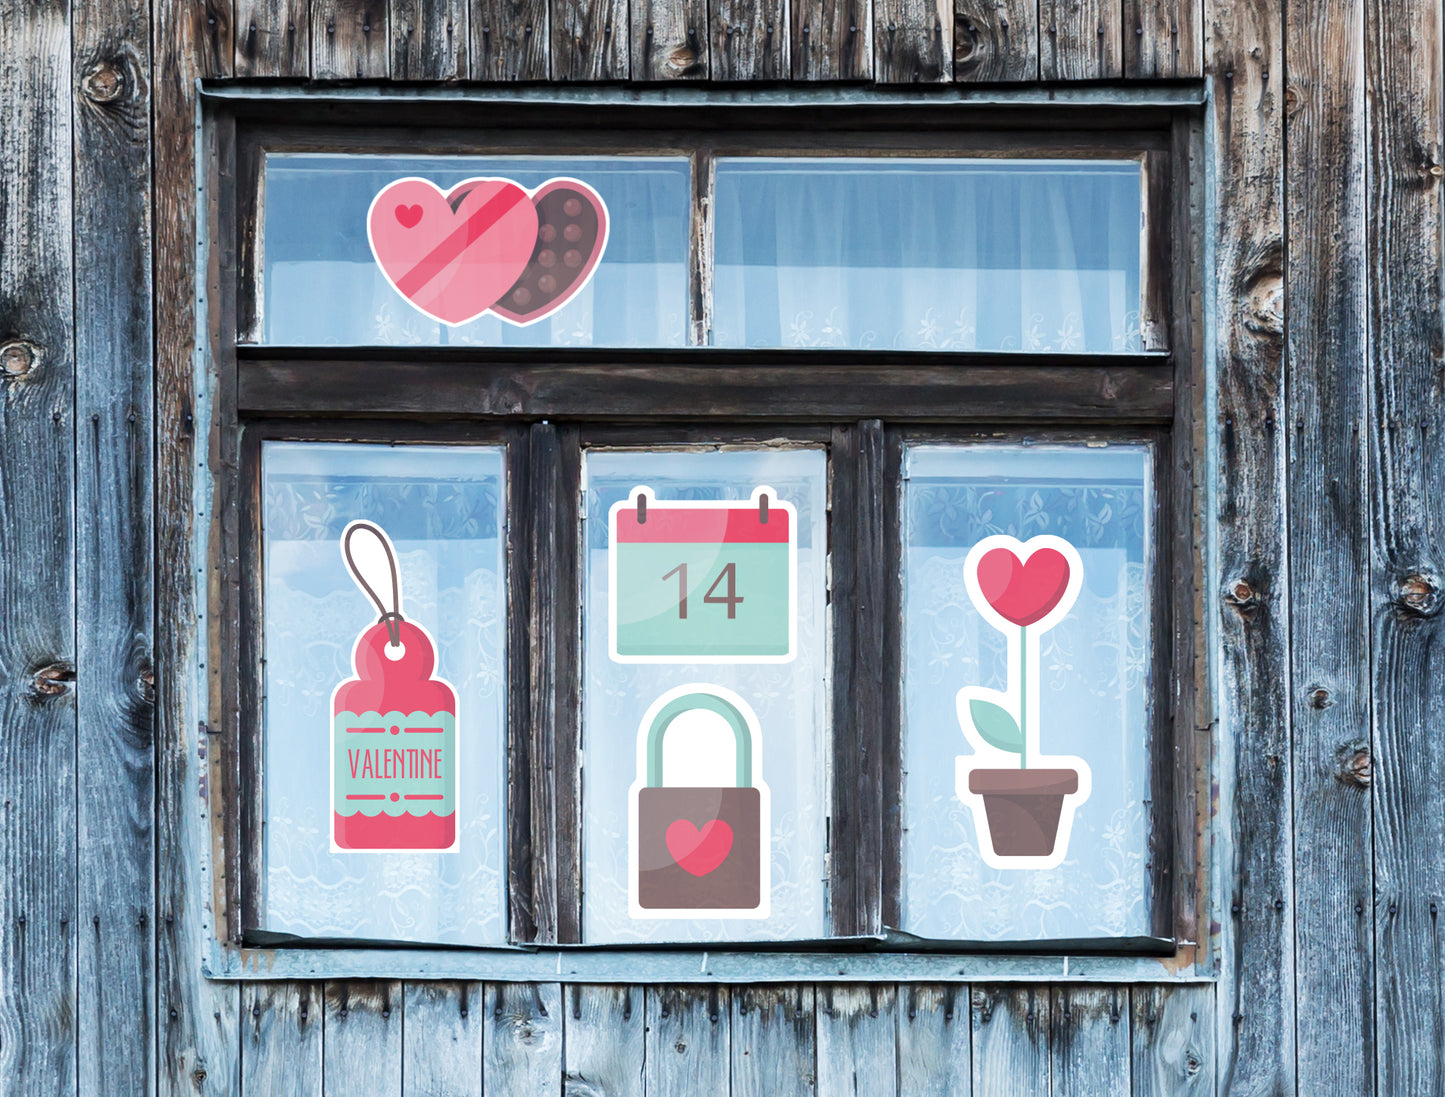 Valentine's Day:  Locked Window Clings        -   Removable Window   Static Decal